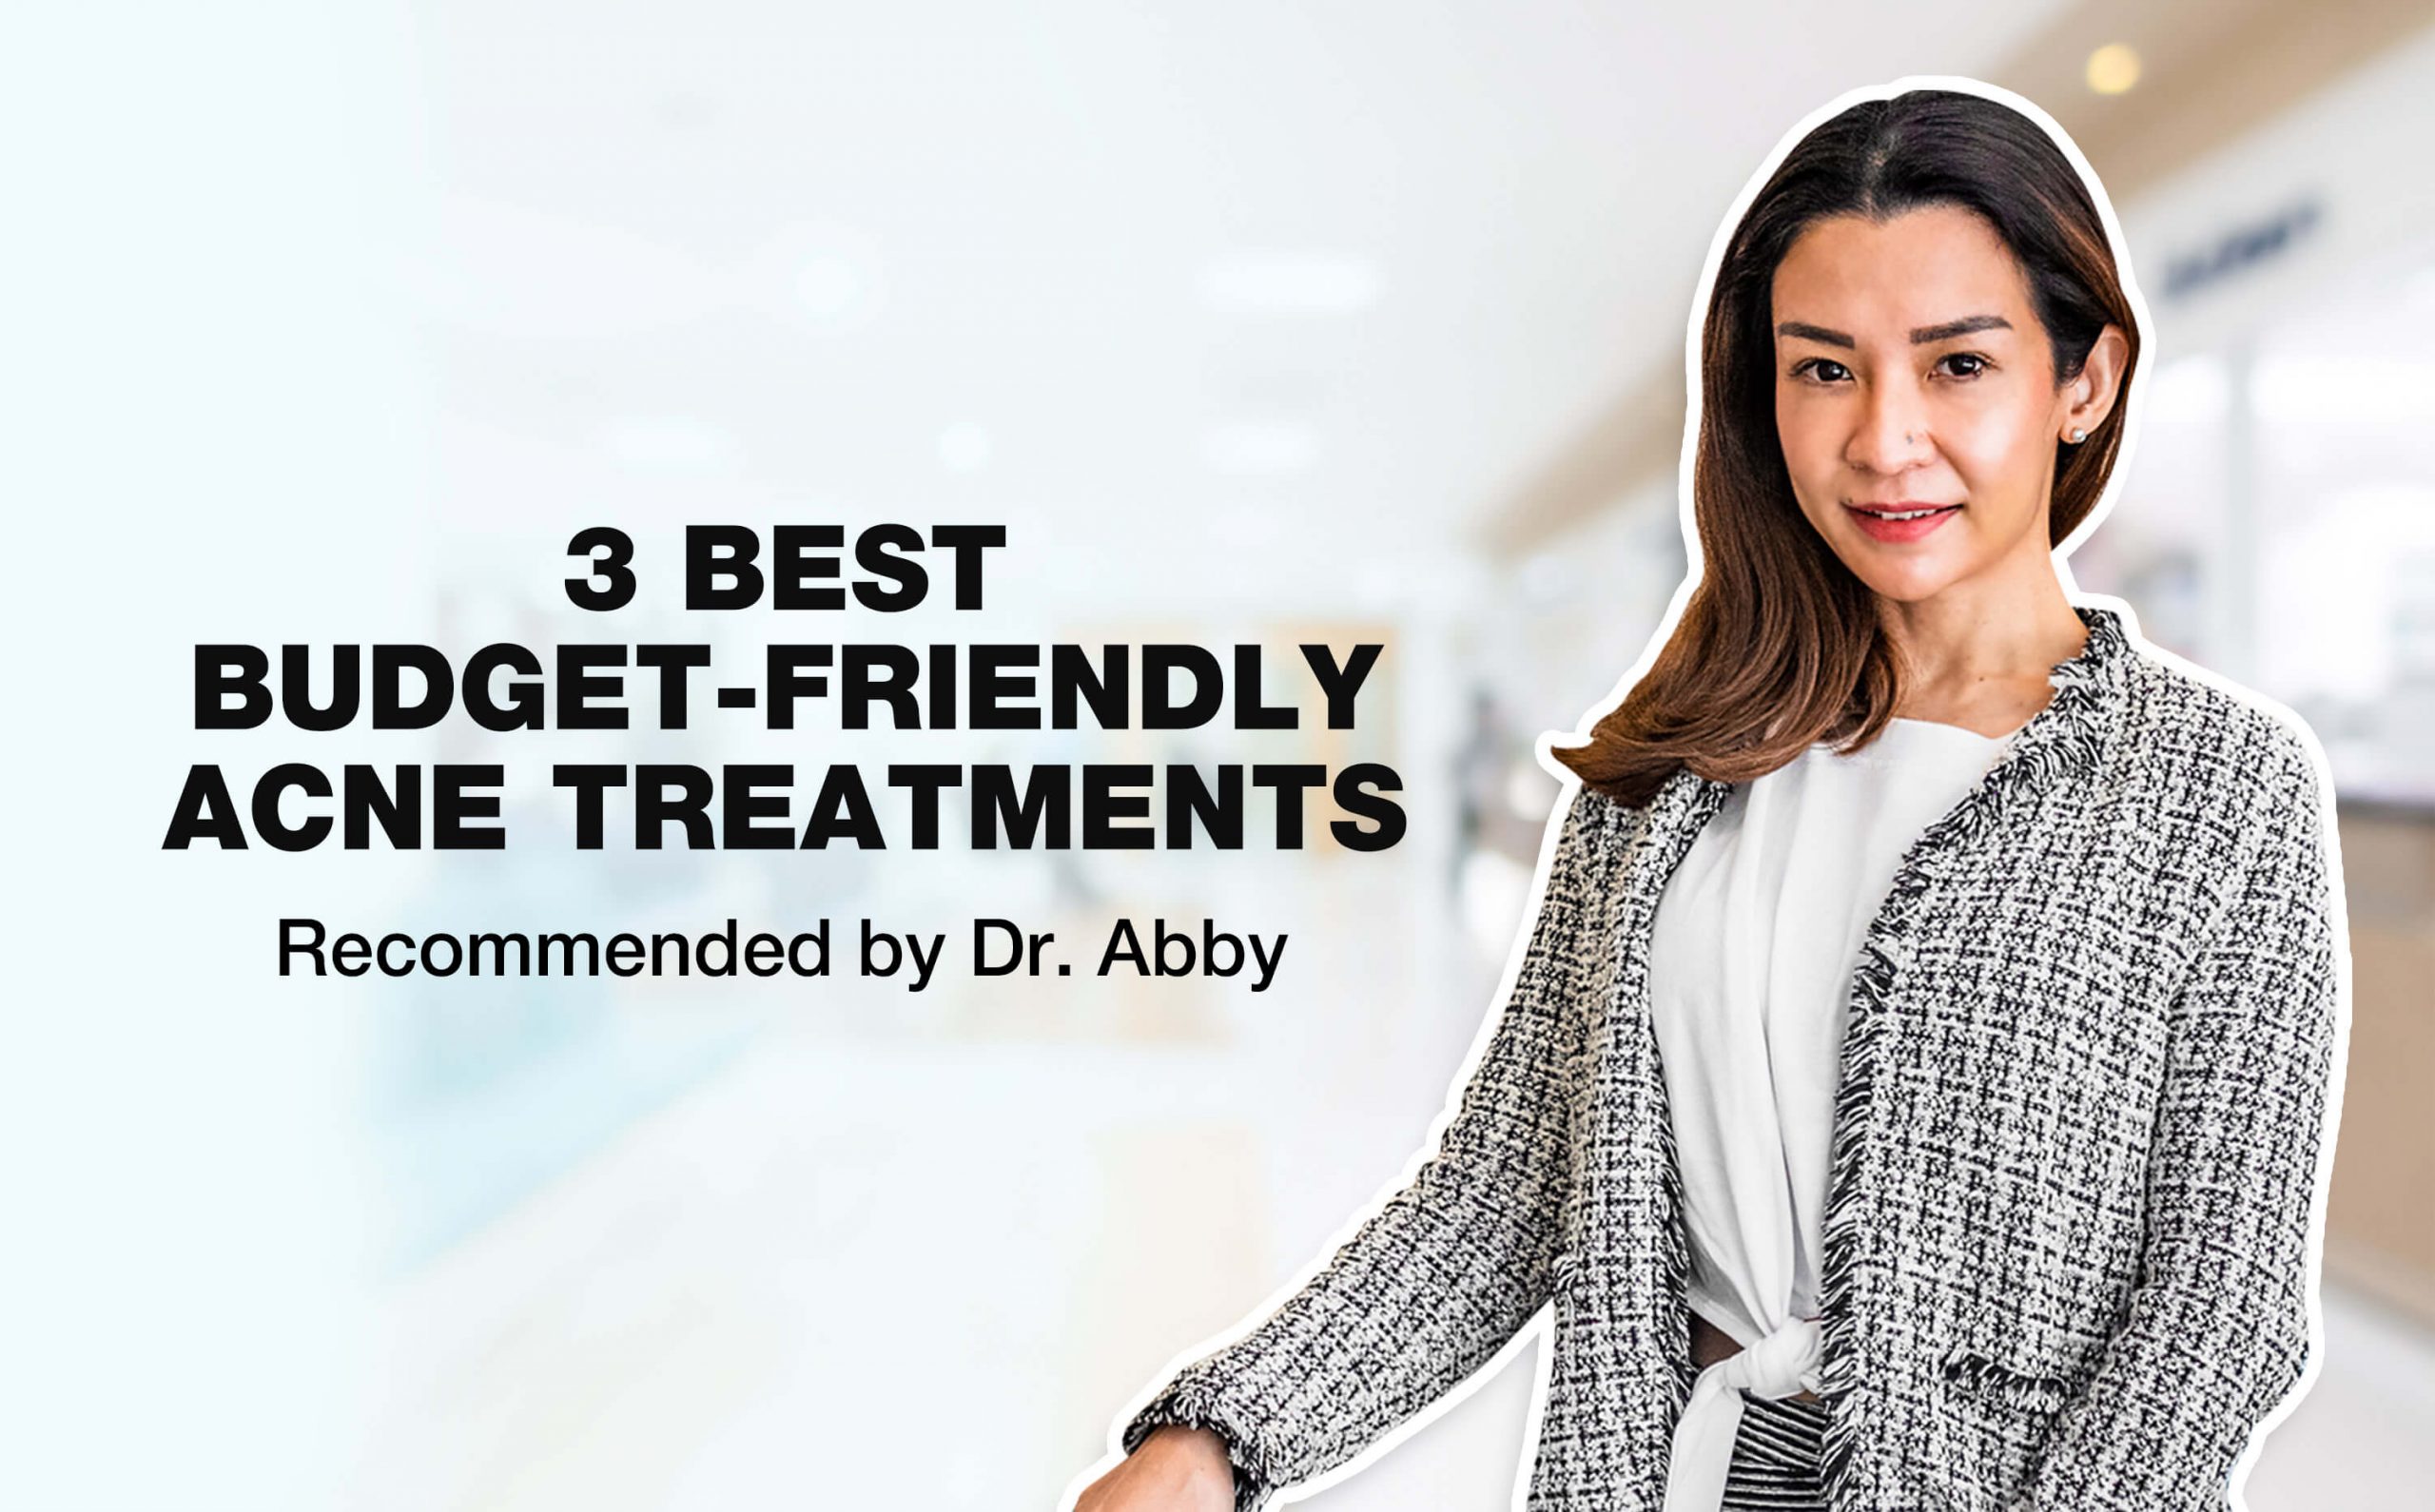 Dr Abby at a clinic, the text '3 BEST BUDGET FRIENDLY ACNE TREATMENT RECOMMENDED BY DR ABBY'.